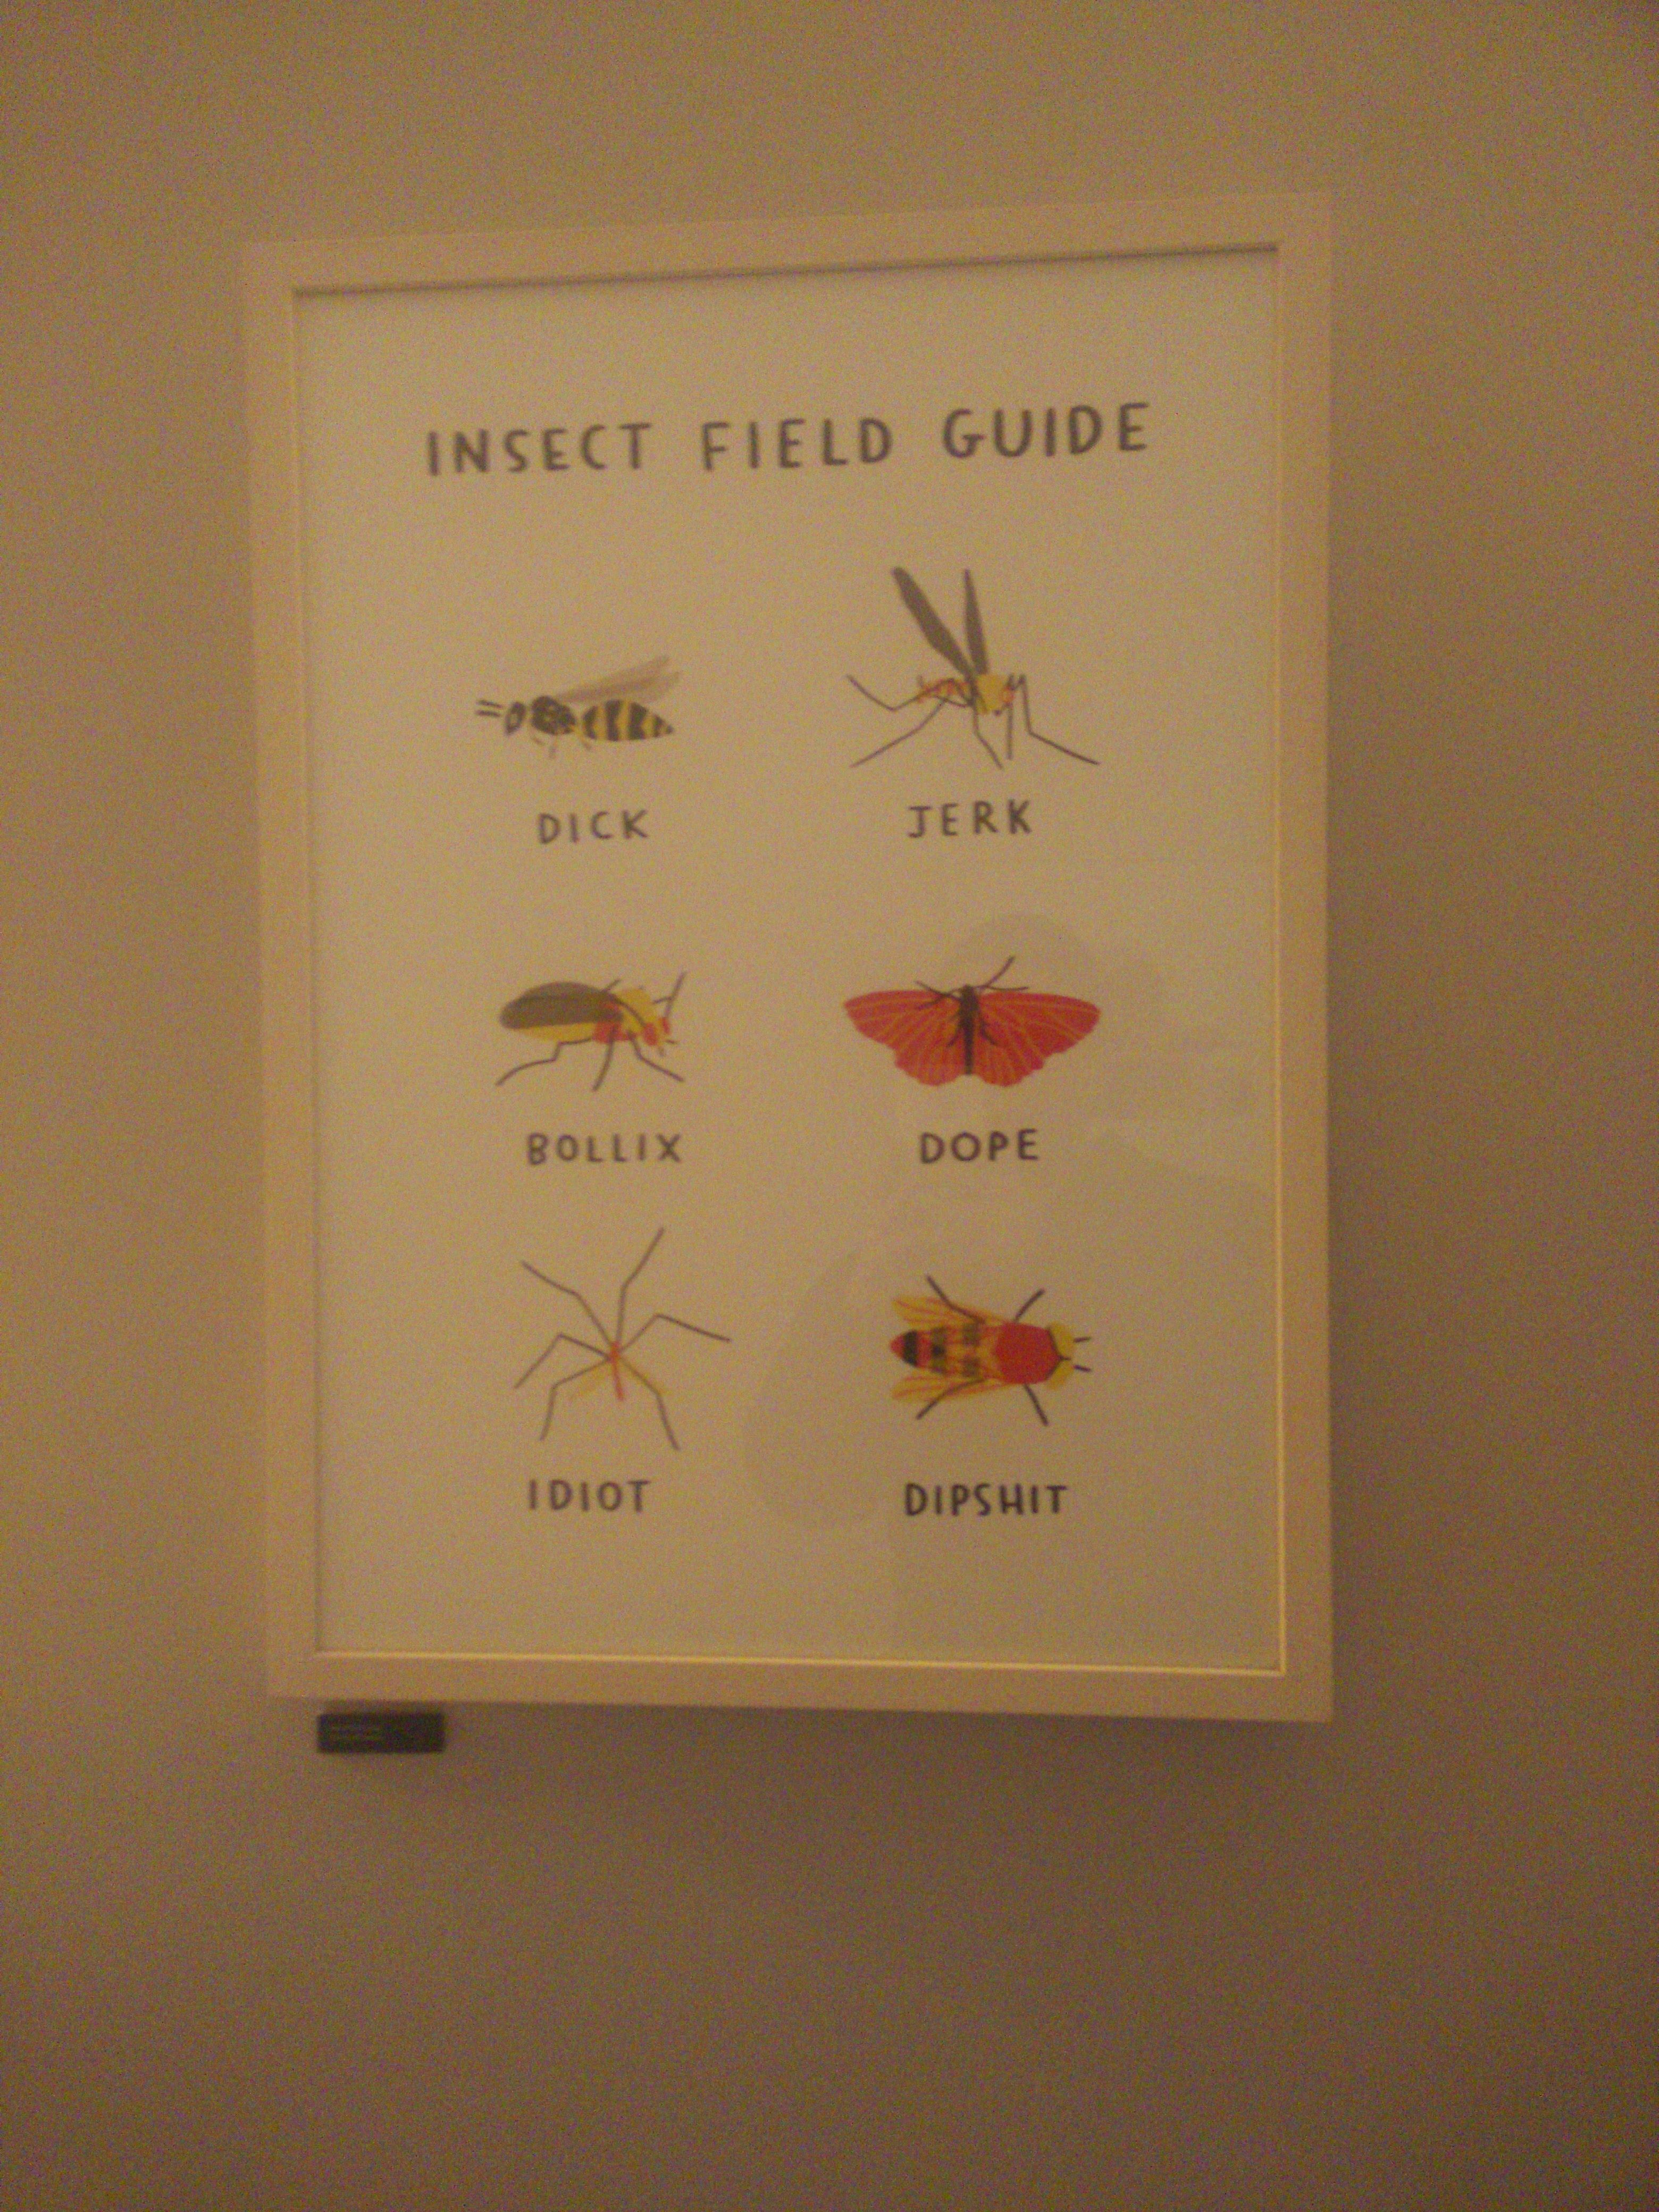 Poster of bugs with profanities below each insect